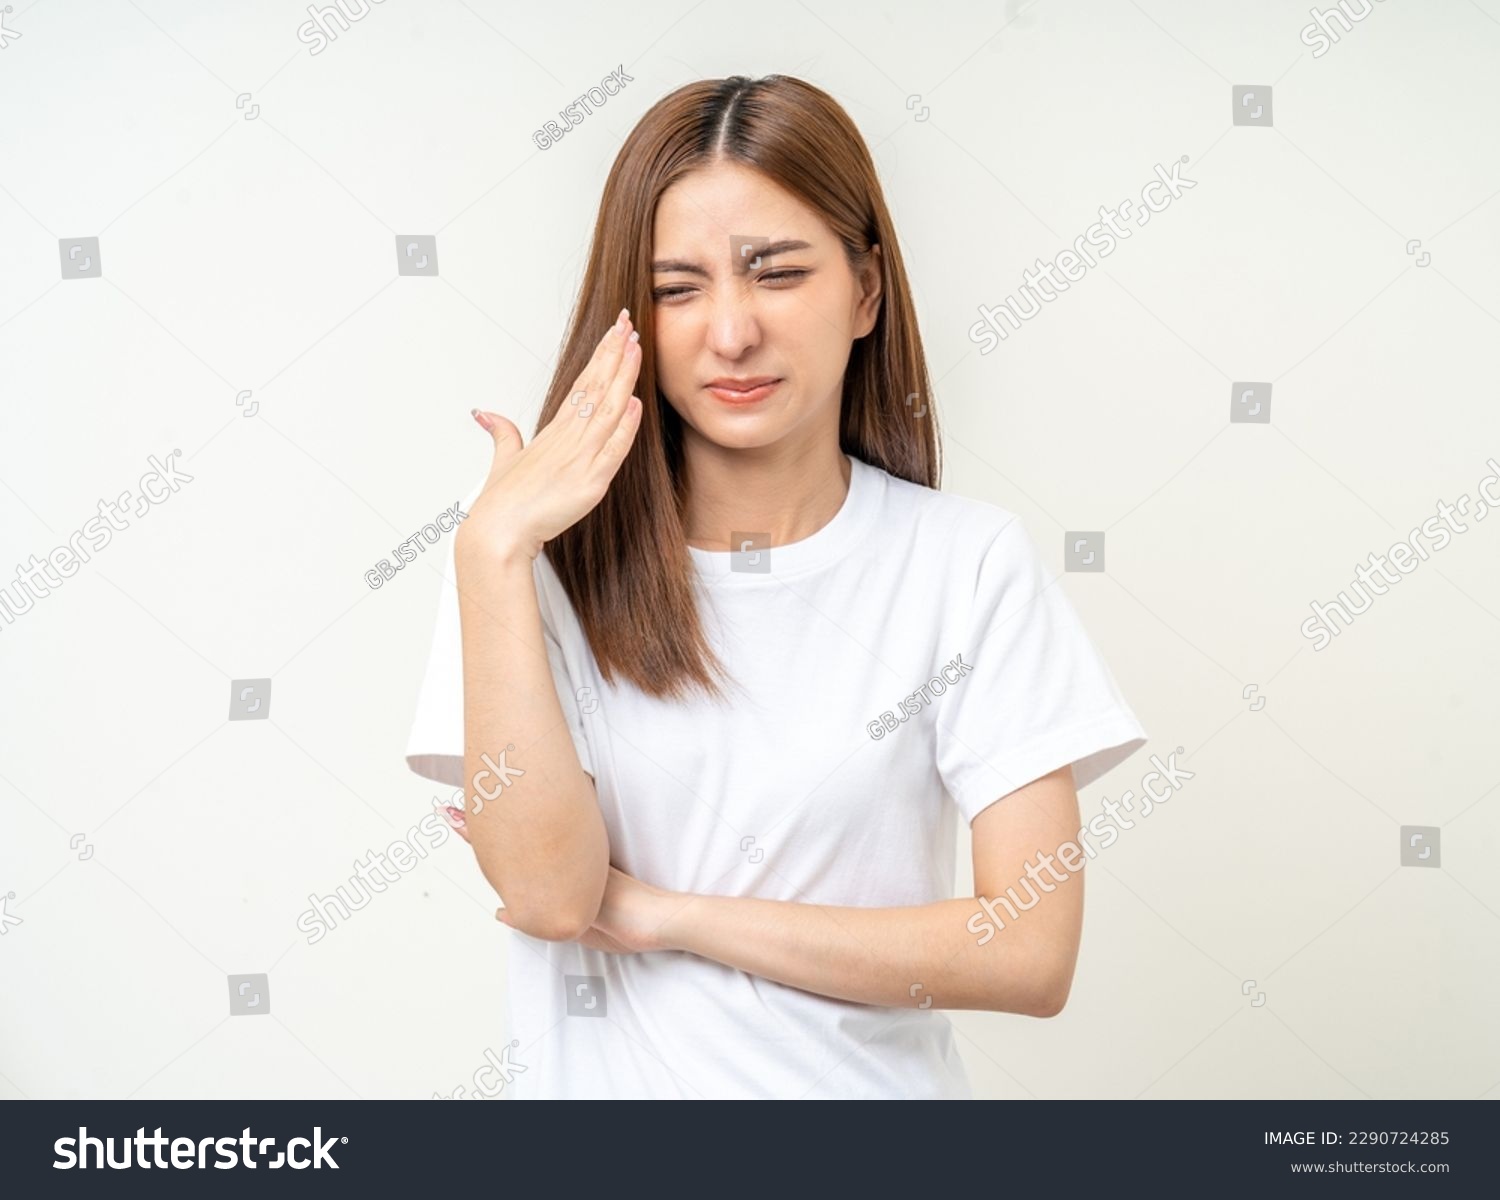 Bad smell stinks. Young beautiful asian woman pinching nose with disgust. Holding breath with fingers on nose #2290724285